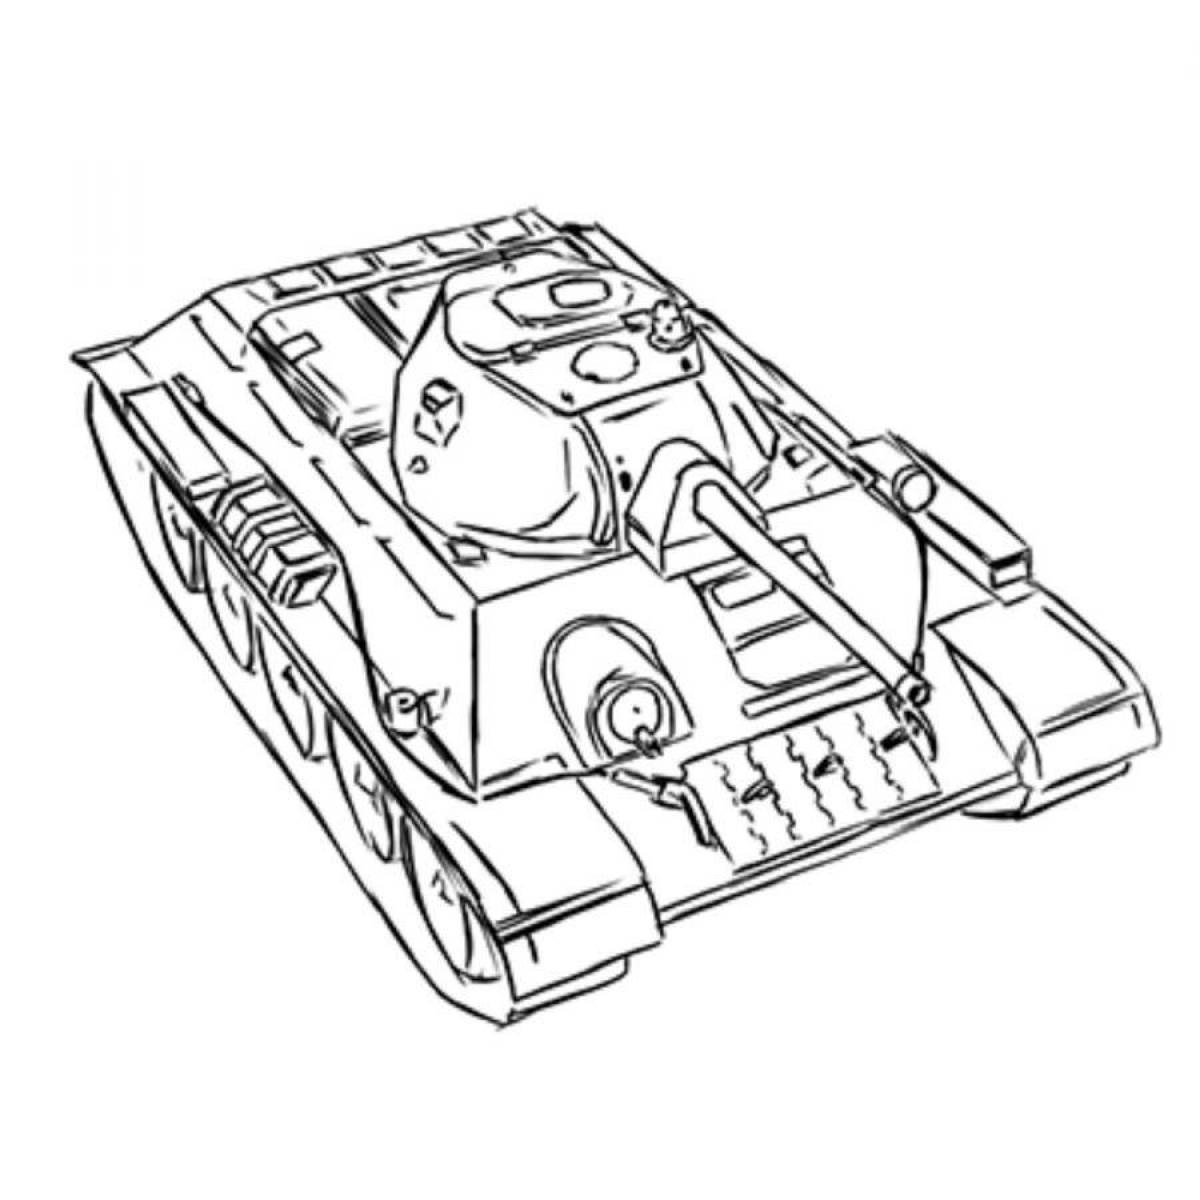 Dazzling tank t34 coloring page